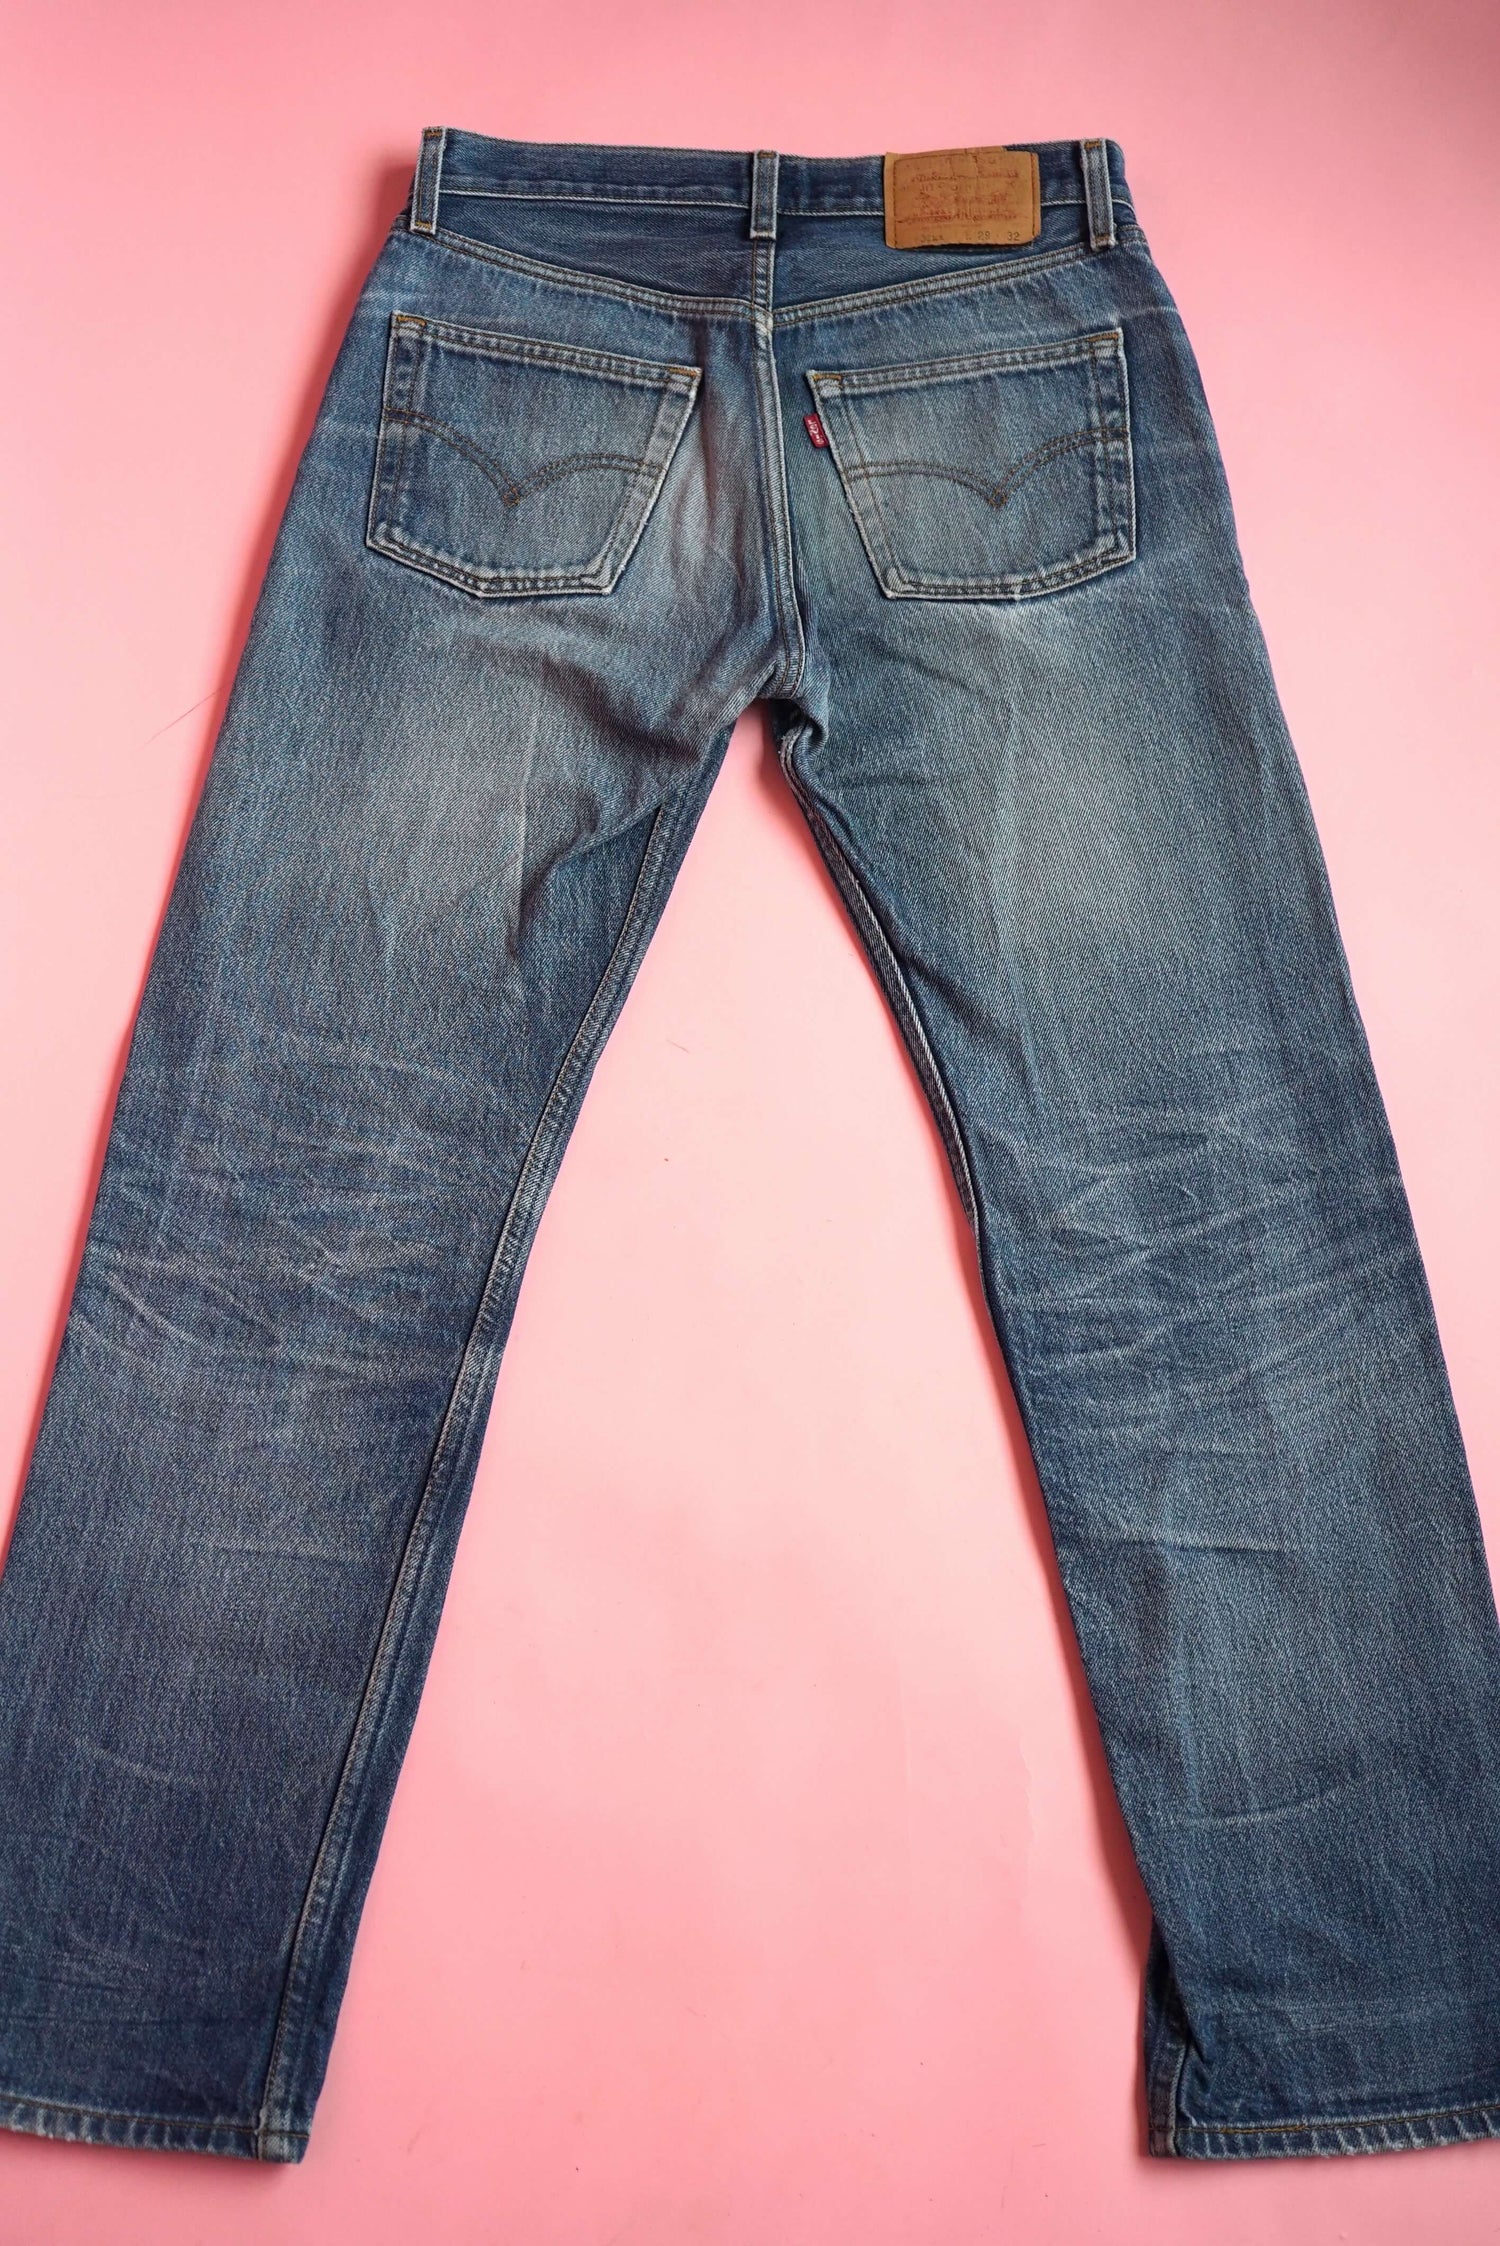 Vintage Levis 501 Jeans Size 30 Patched Levis Faded Levis Small Distressed Levis  501 Denim Reworked Levis -  Norway